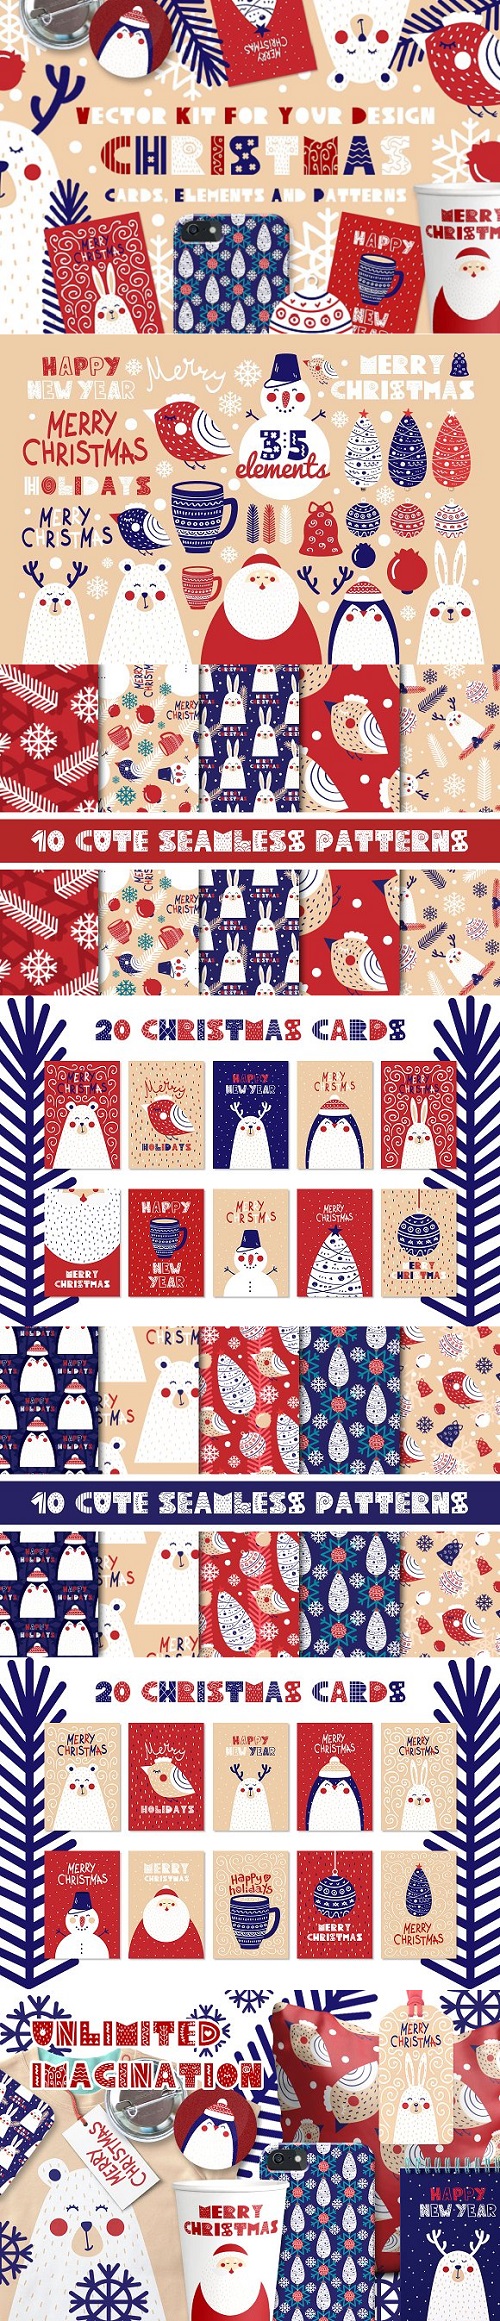 Christmas cards, elements & patterns - 2063768